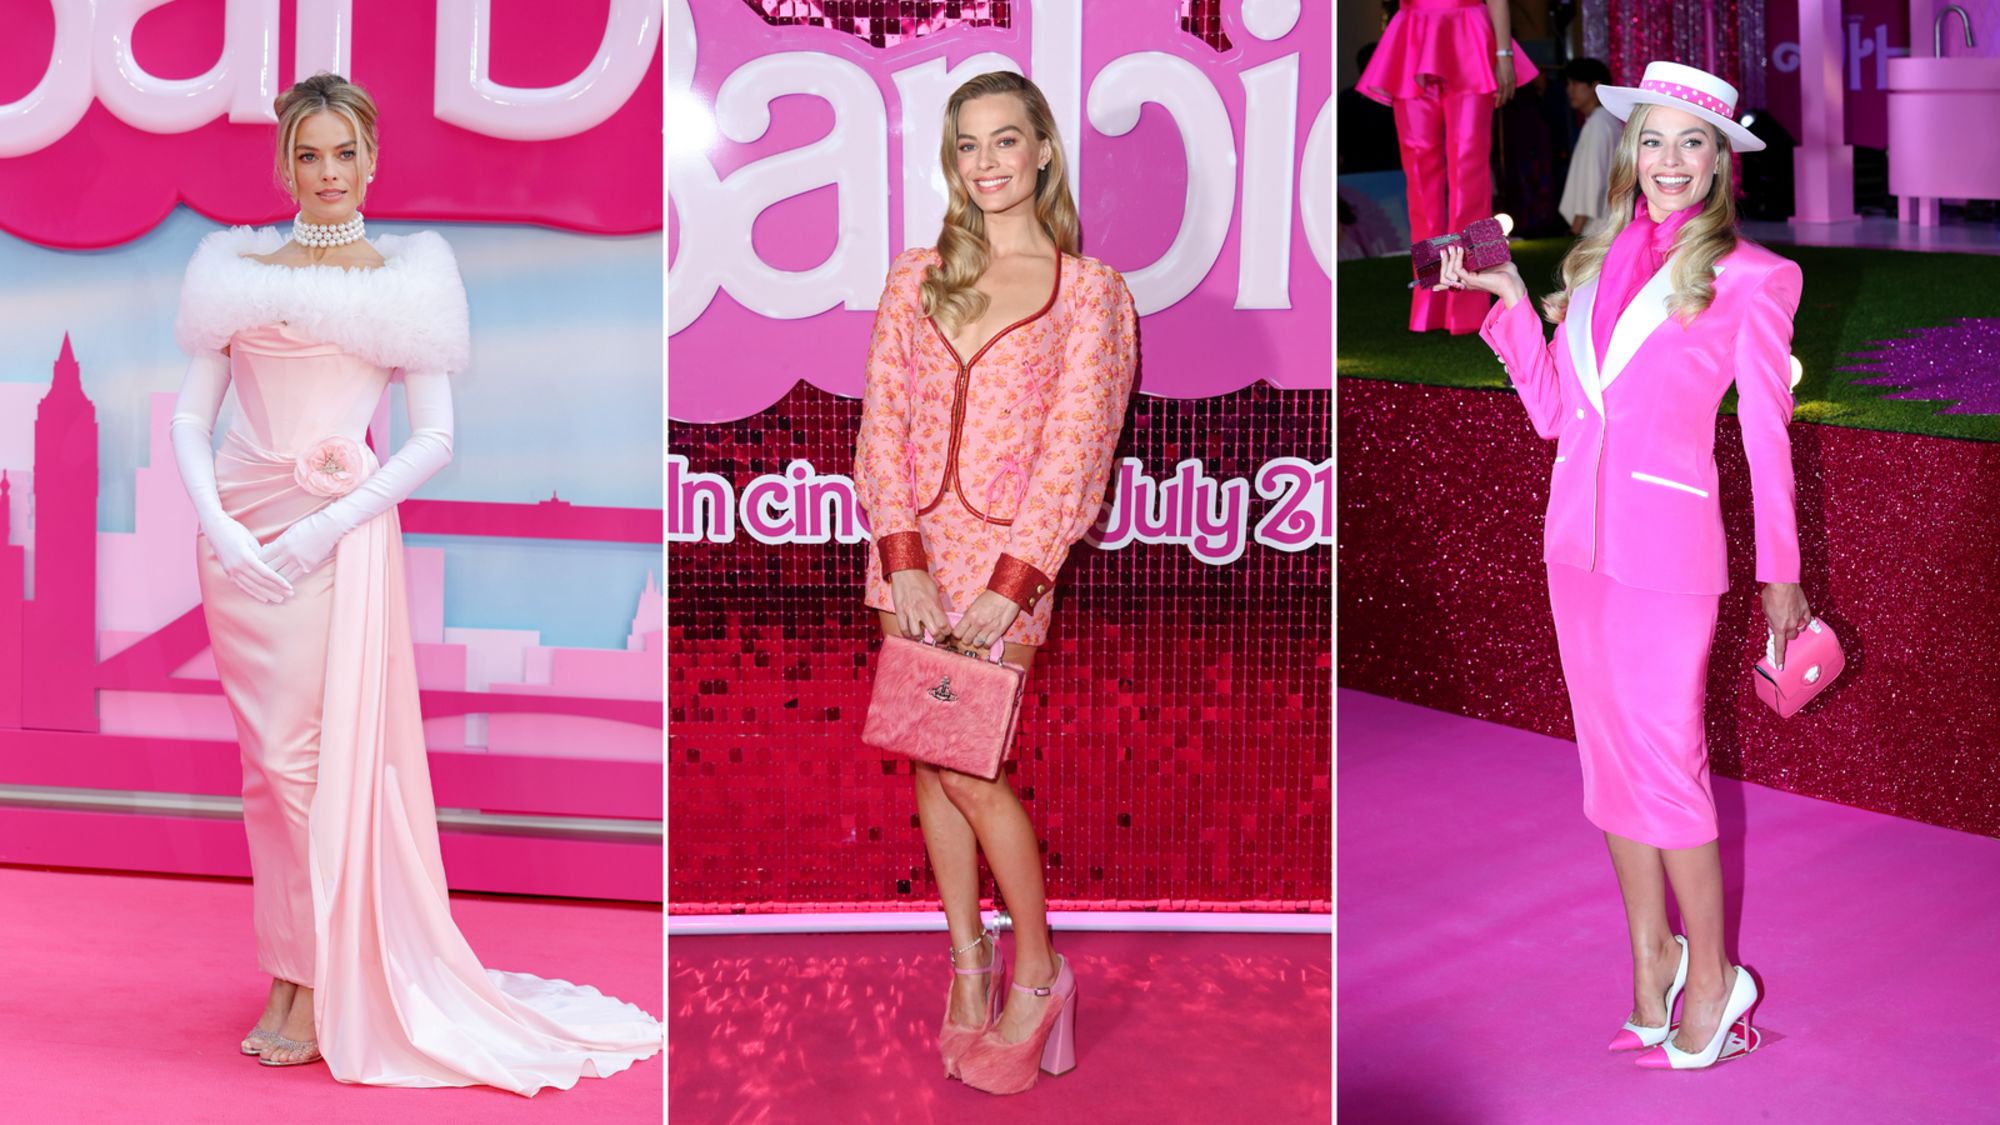 LONDON, ENGLAND - JULY 12:  Margot Robbie attends the "Barbie" European Premiere at Cineworld Leicester Square on July 12, 2023 in London, England. (Photo by Mike Marsland/WireImage)

LONDON, ENGLAND - JULY 13: Margot Robbie attends a photocall on July 13, 2023 in London, England. (Photo by Stuart C. Wilson/Getty Images for Warner Bros. )

SEOUL, SOUTH KOREA - JULY 02: Actress Margot Robbie attends the Seoul Premiere of "Barbie" on July 02, 2023 in Seoul, South Korea. (Photo by Han Myung-Gu/WireImage)